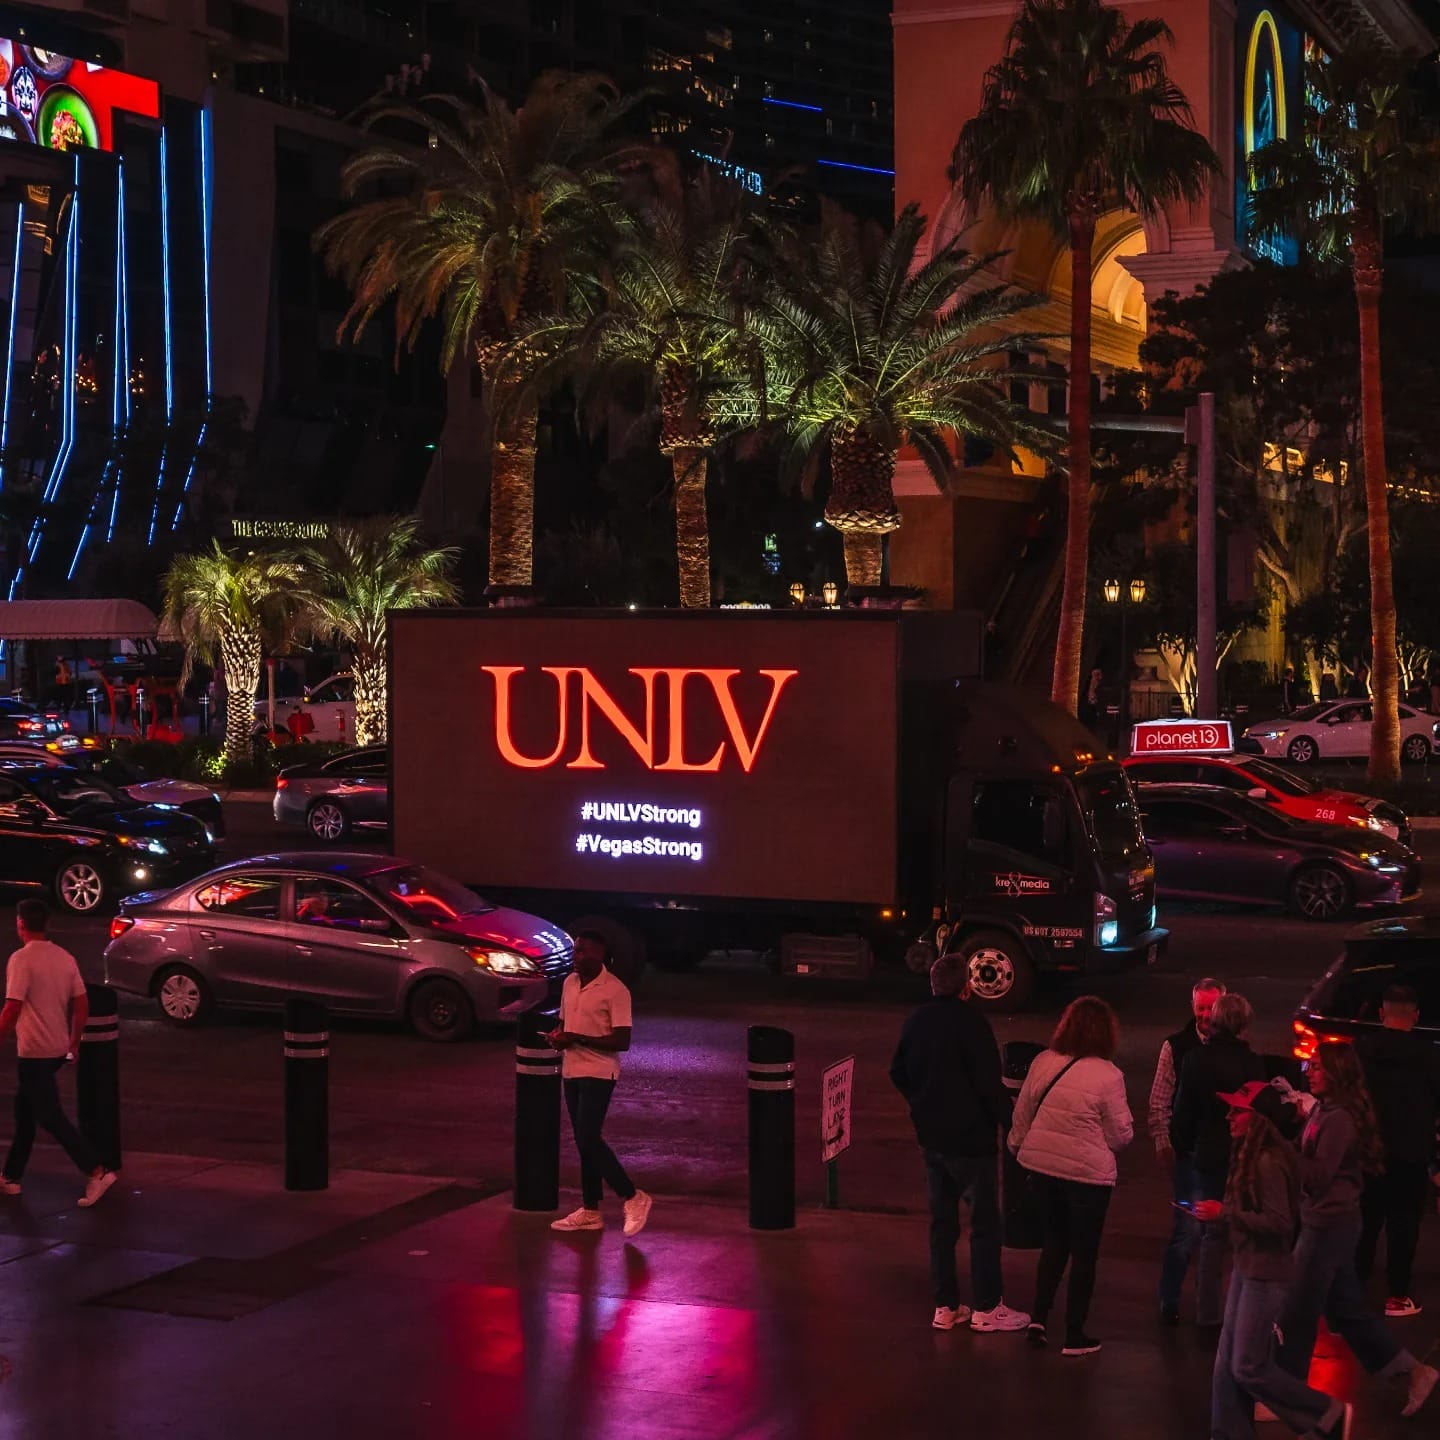 UNLV sign with hashtag on Las Vegas street at night